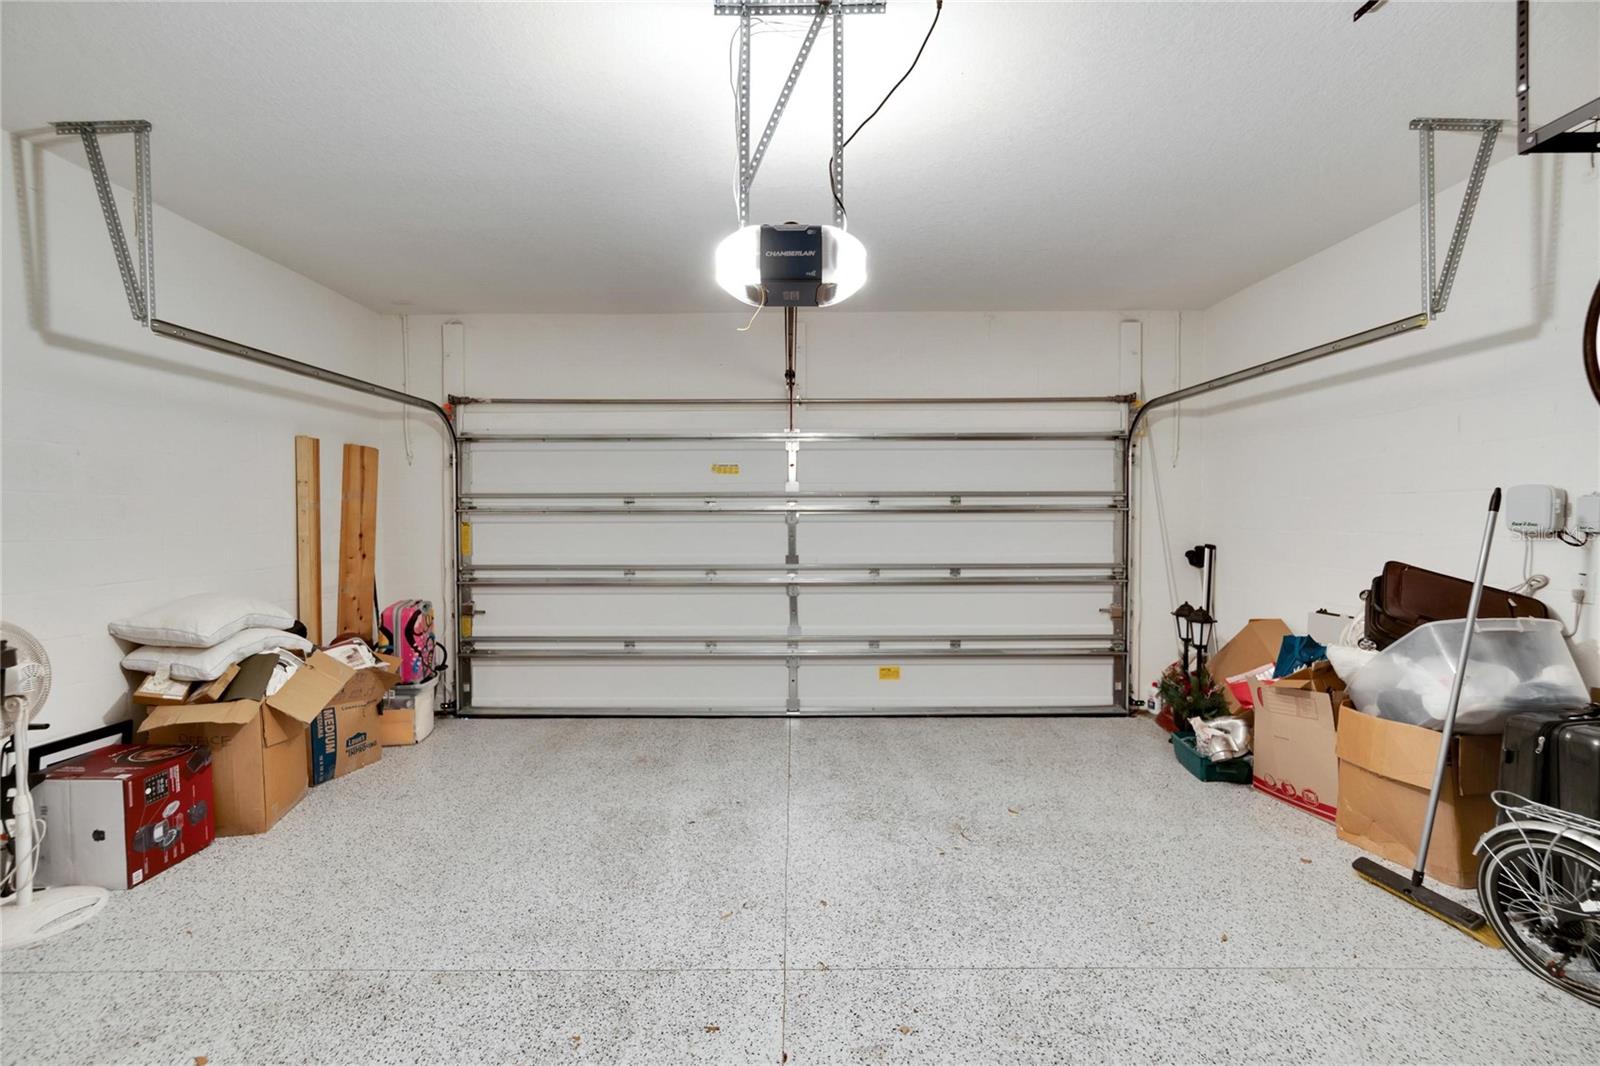 Garage w/ epoxy floor and storage rack to the right